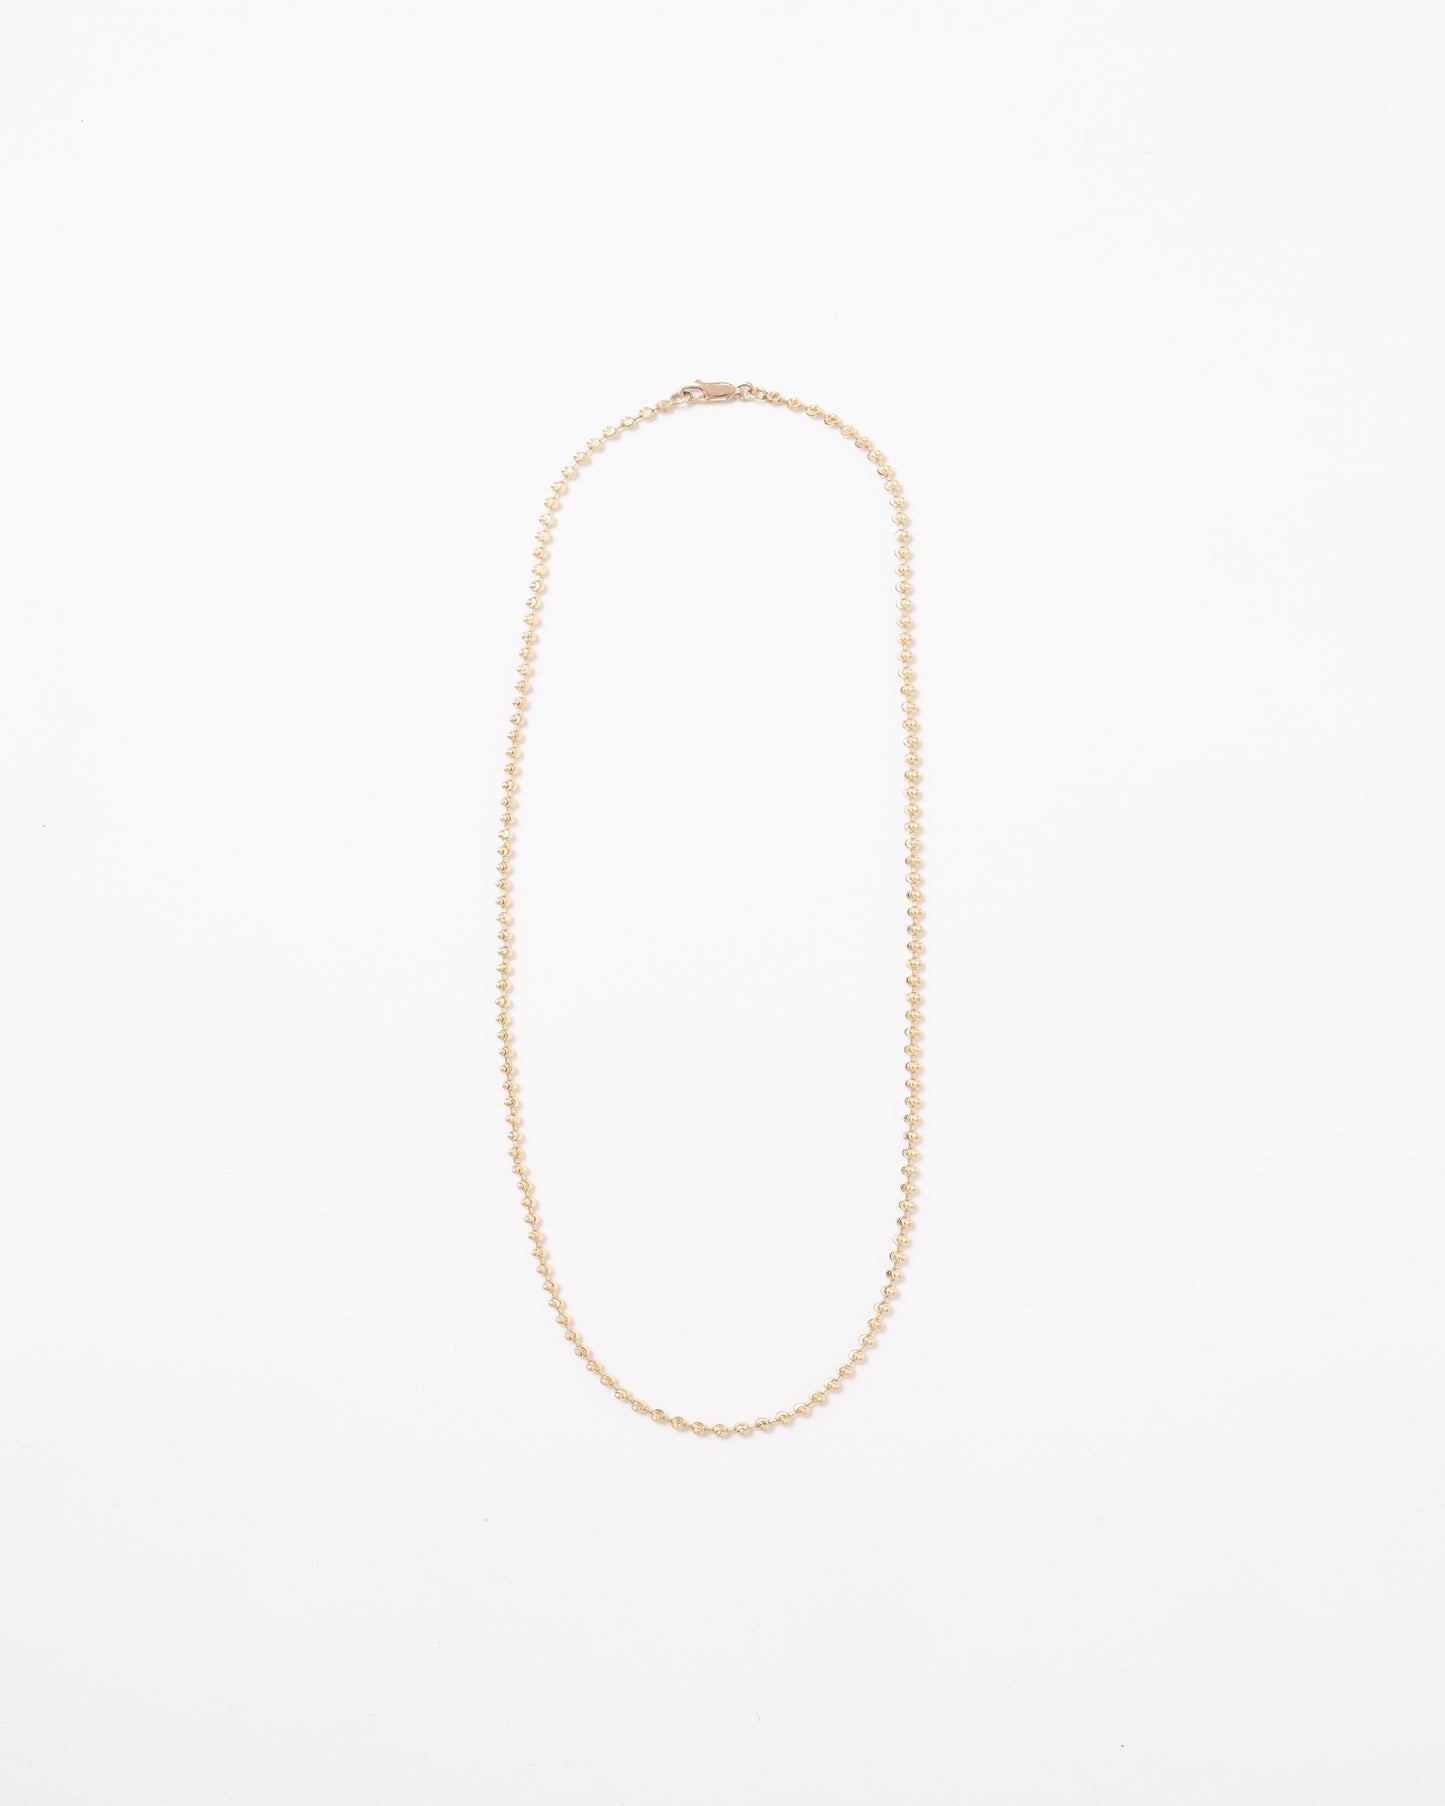 Toilet Chain Necklace - 14k Gold